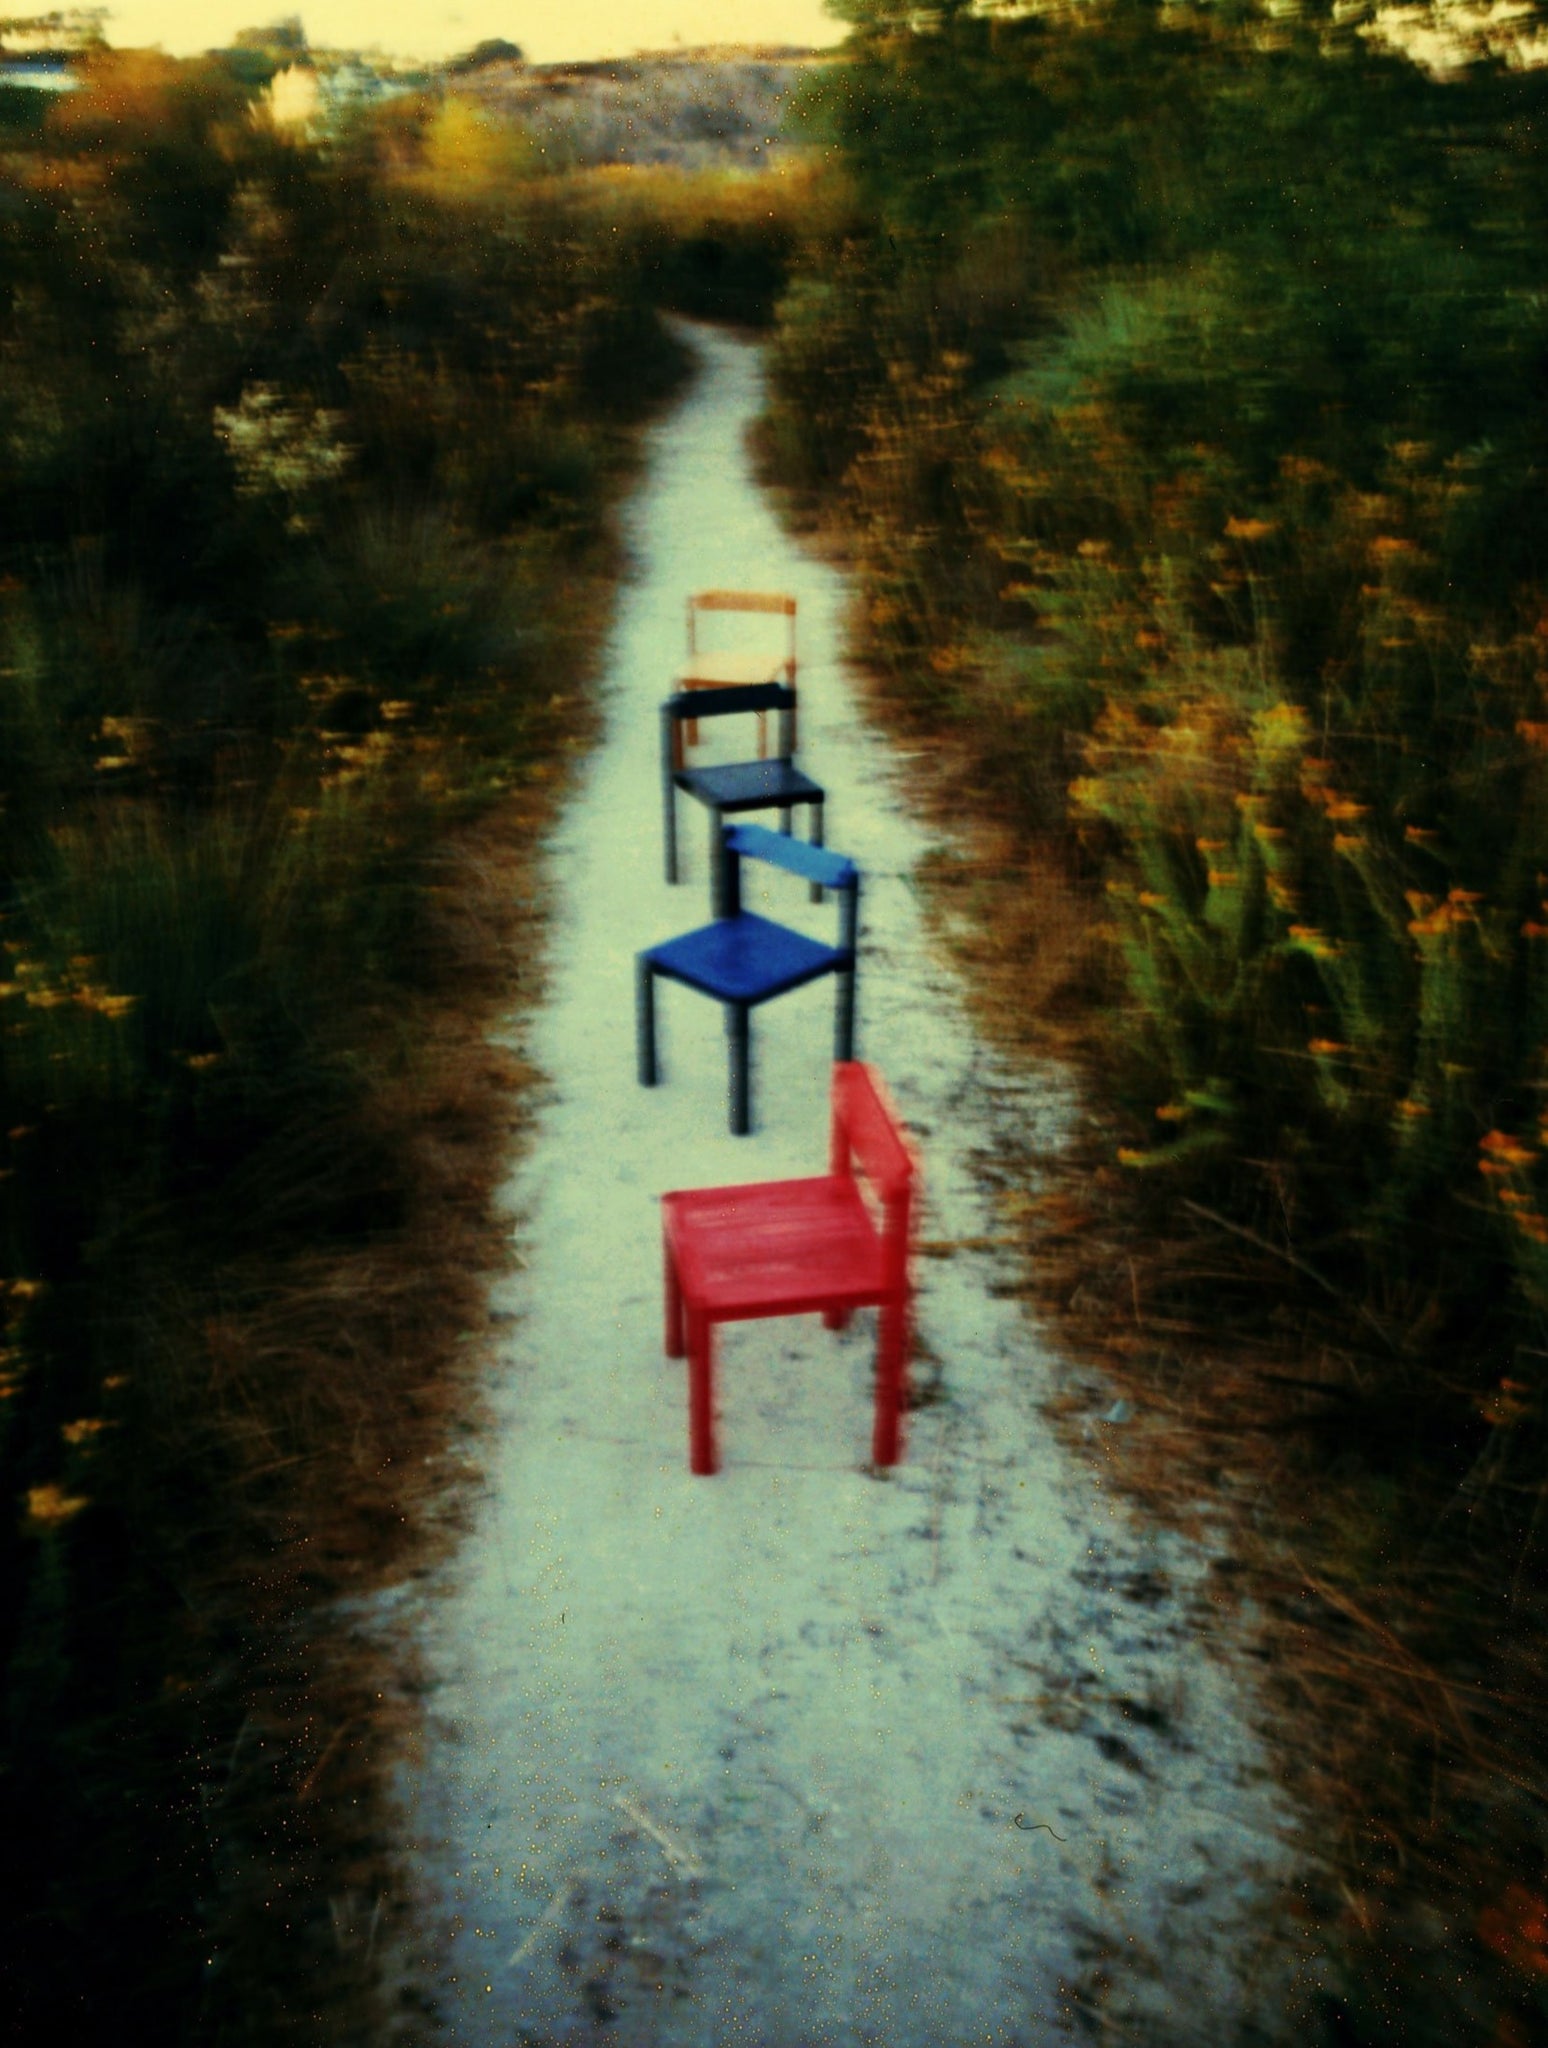 Red, Blue, Black, and Natural finish Anything Chairs lined up along a dirt walking path.